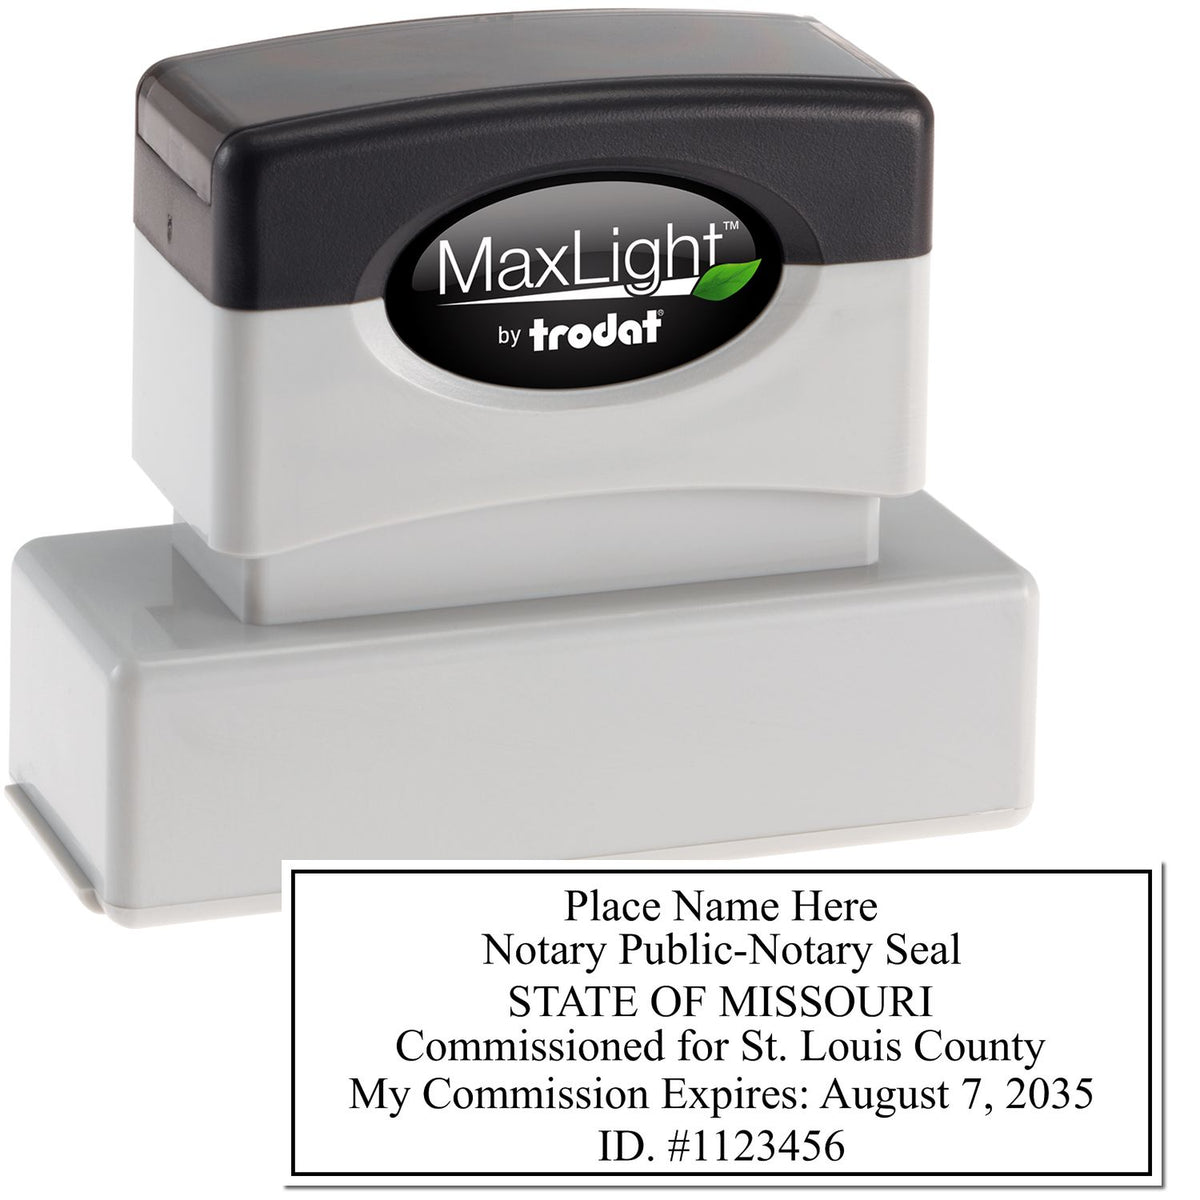 The main image for the MaxLight Premium Pre-Inked Missouri Rectangular Notarial Stamp depicting a sample of the imprint and electronic files